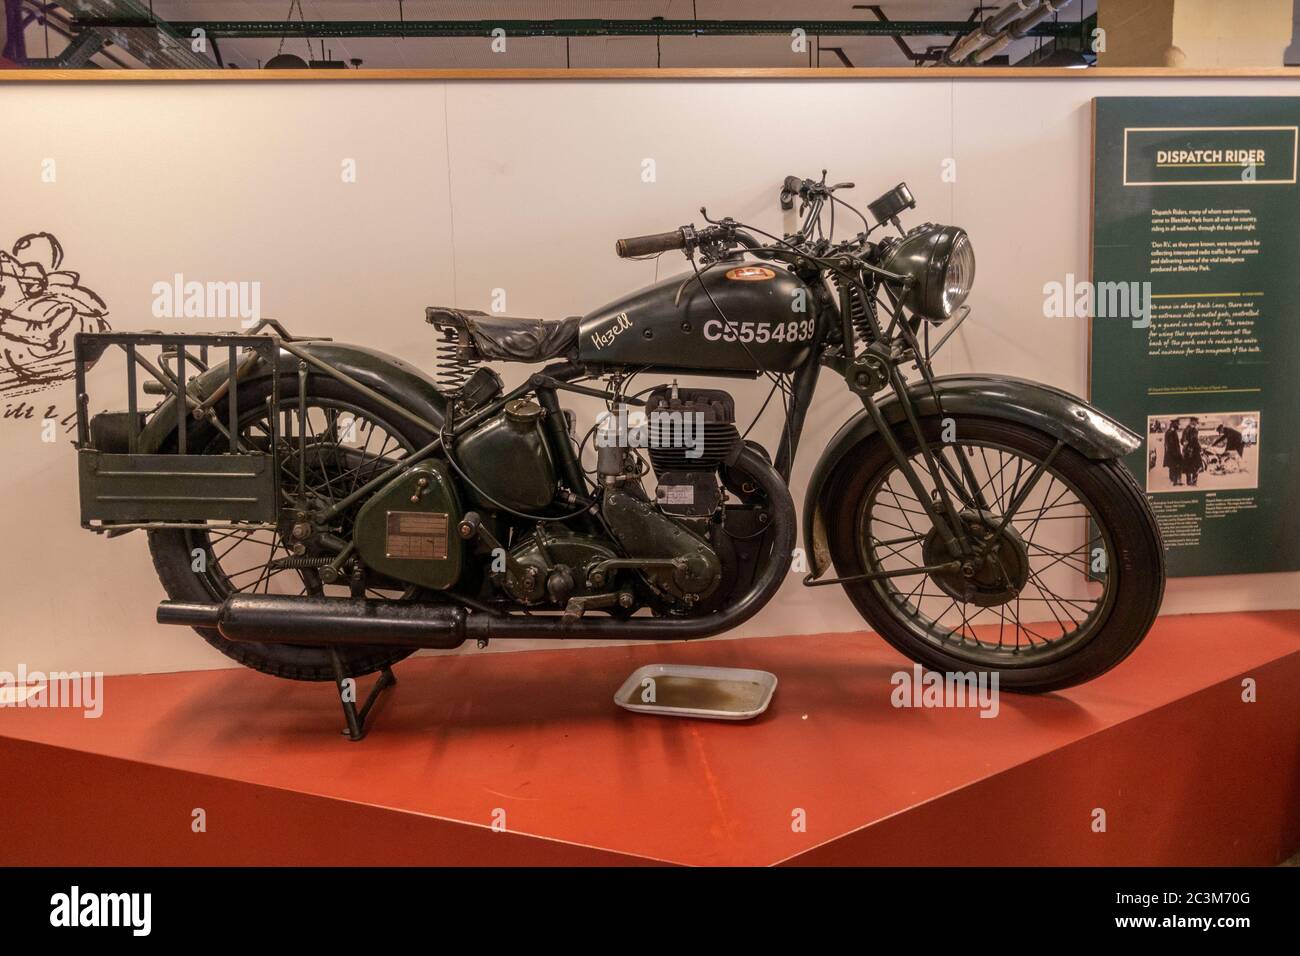 A BSA WM20 motorcycle used by WWII dispatch riders on display in Bletchley Park, Bletchley. Buckinghamshire, UK. Stock Photo